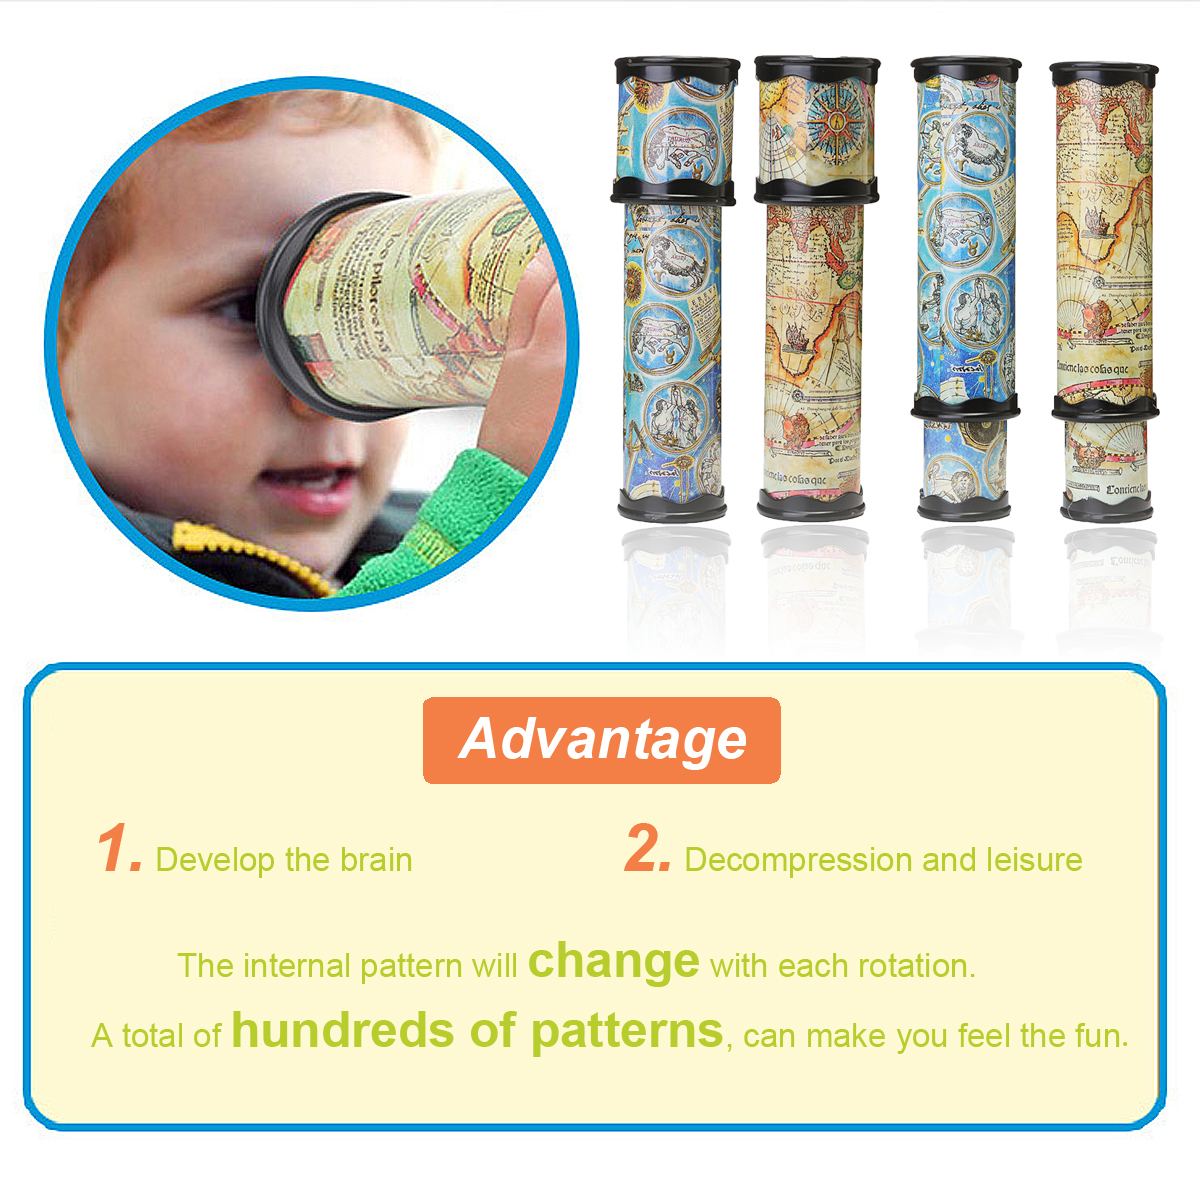 2030cm-Blue-Yellow-Magical-Rotate-Kaleidoscope-Toy-Extended-Rotation-Fancy-Colored-World-Kids-Toy-1258764